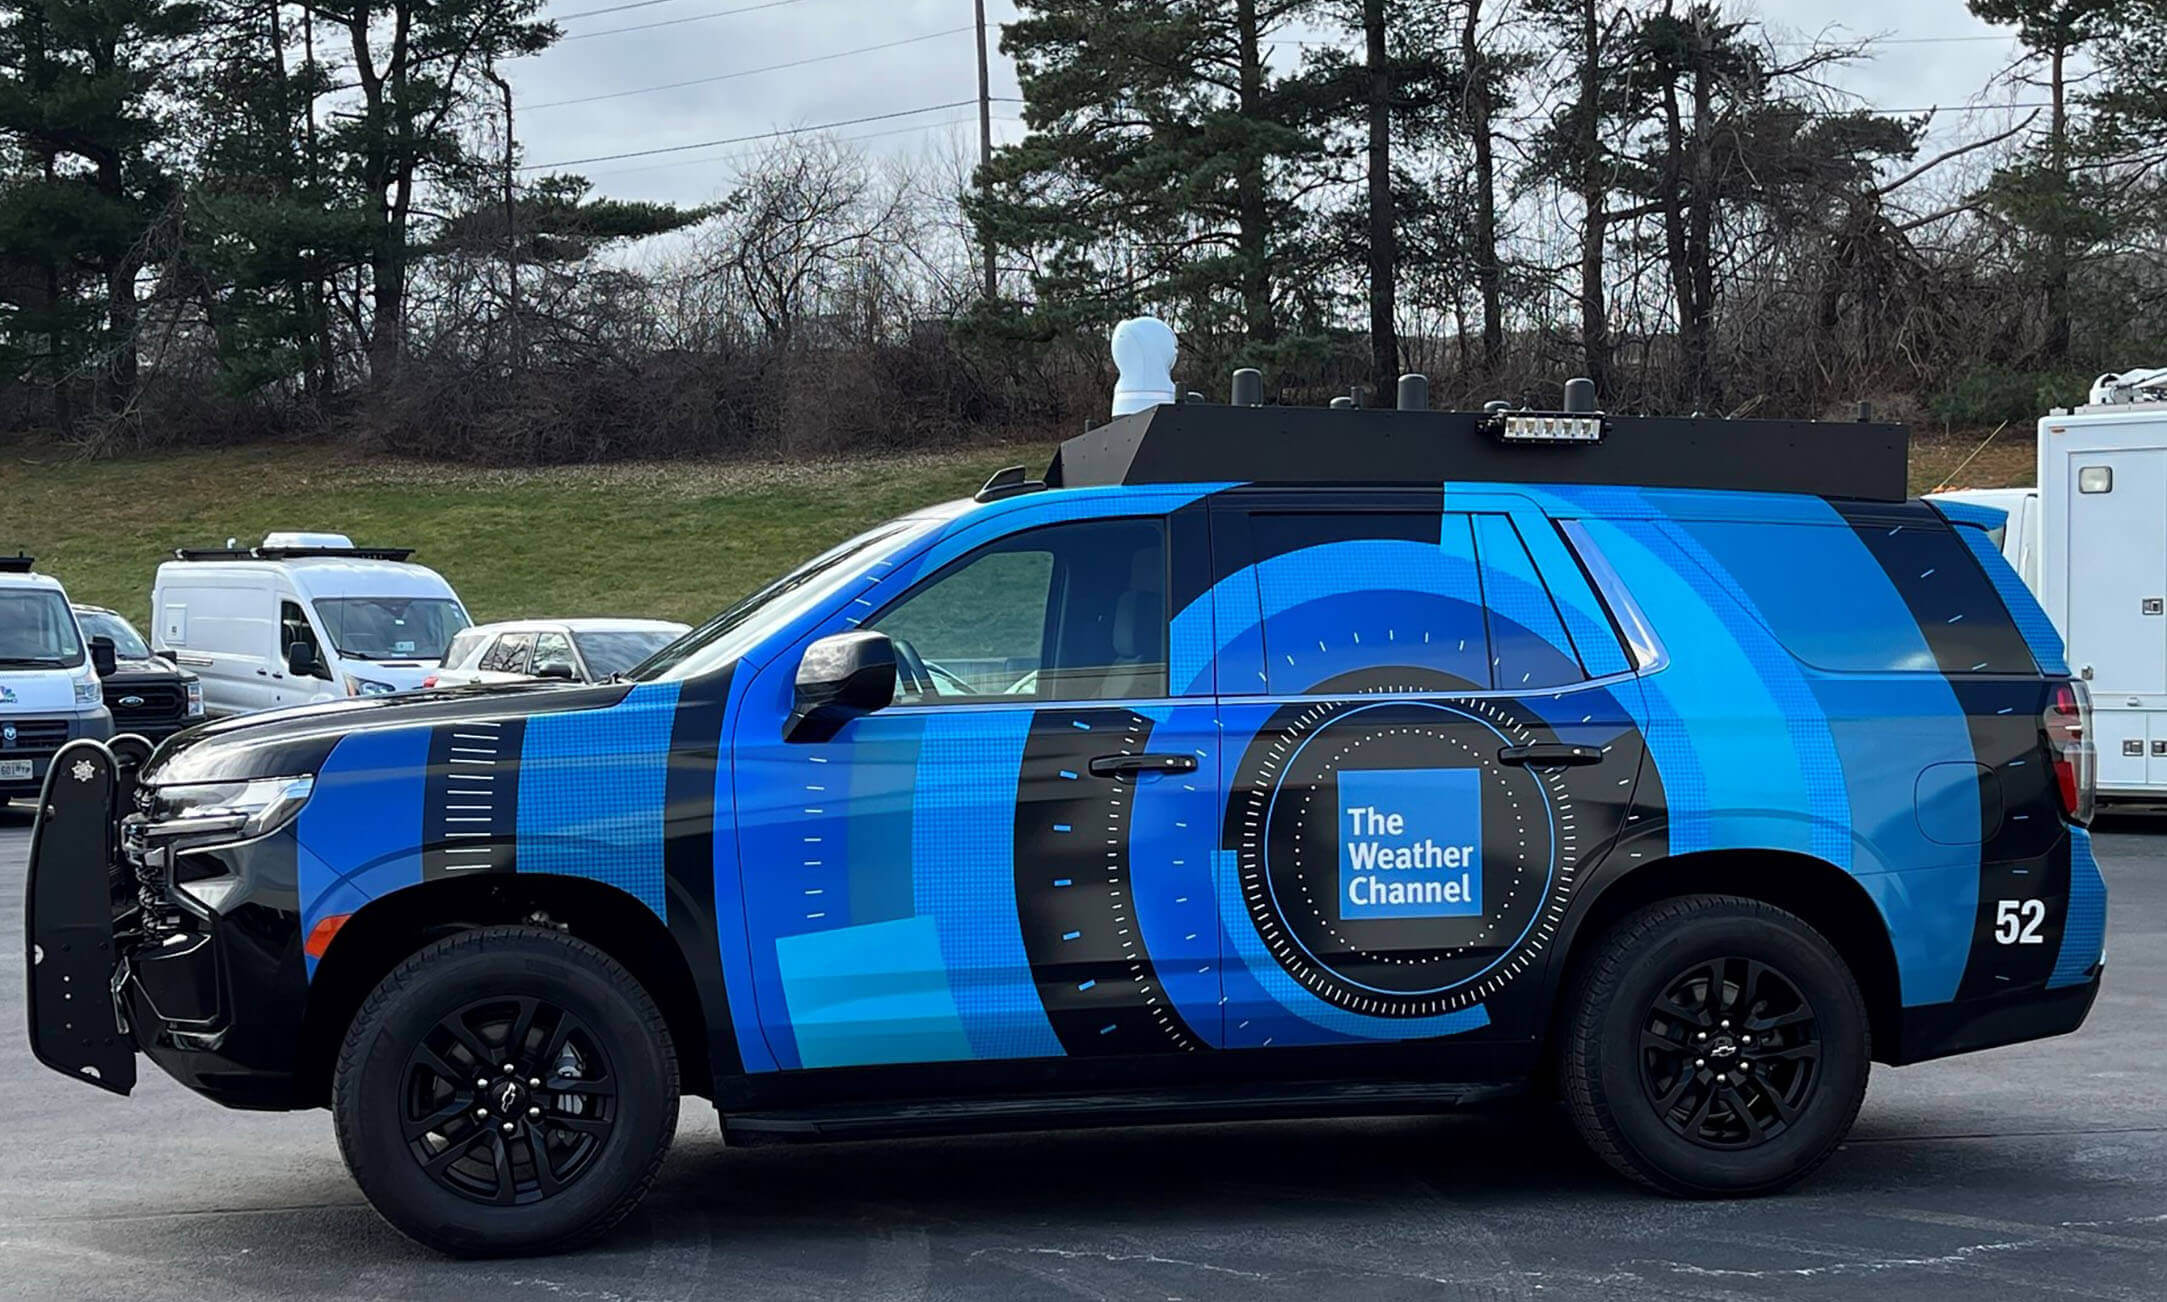 The Weather Channel's Vision SUV featured image